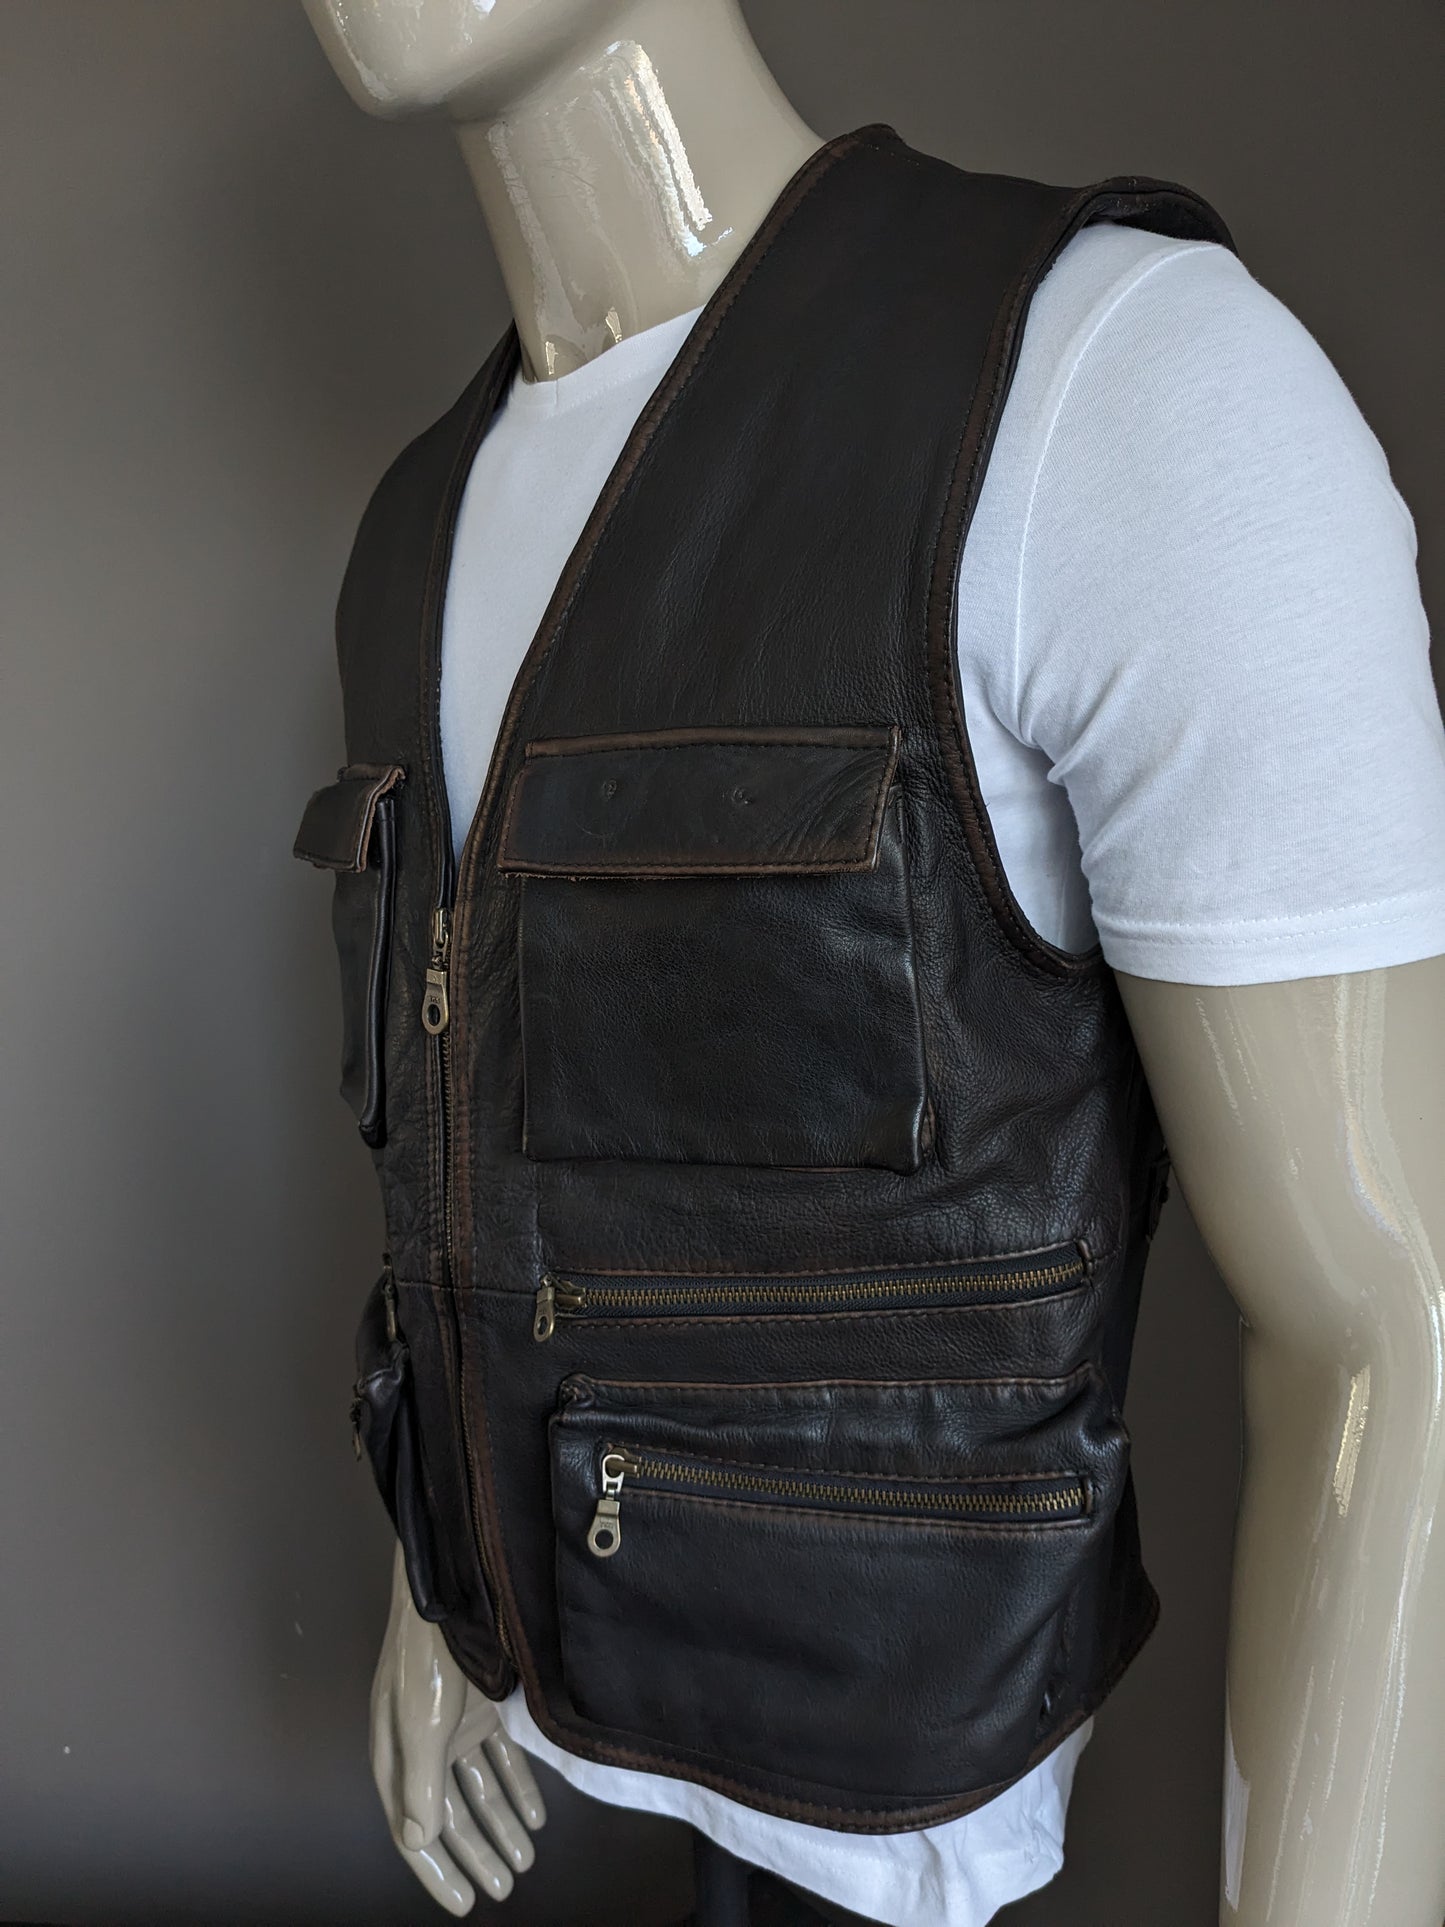 Vintage 80s 90s Leather Body Warmer / Gilet with lots of bags and 2 inner pockets. Dark brown. Size S / M.